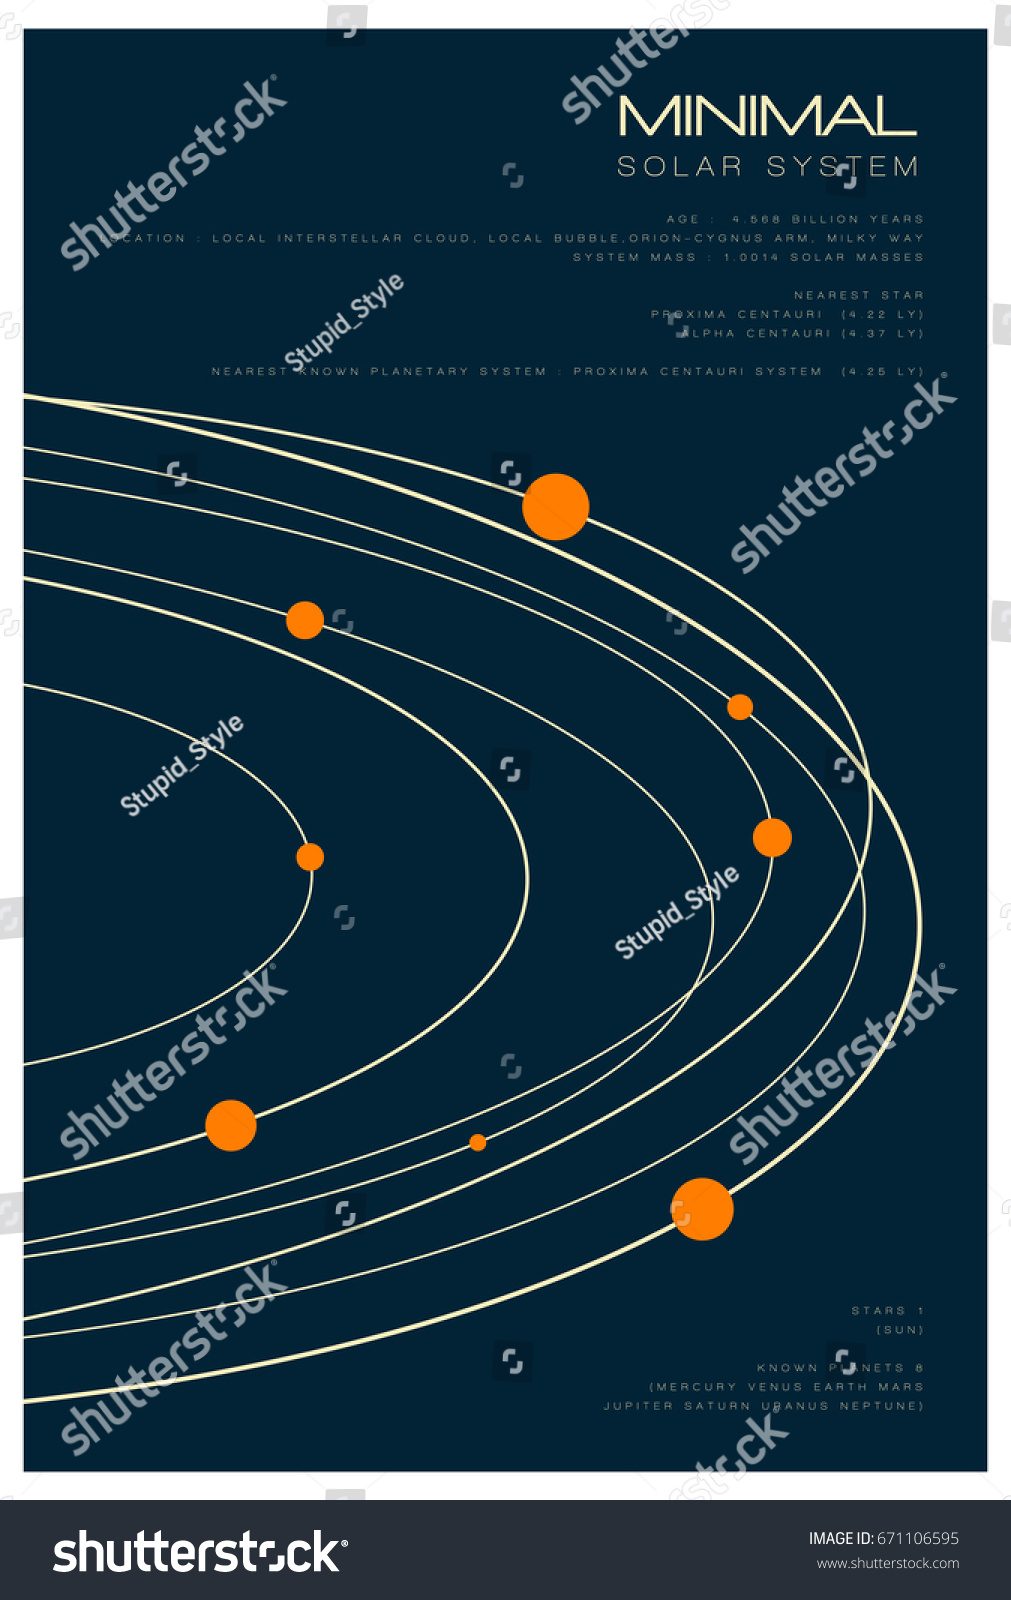 Minimal Solar System Poster The Arts Abstract Stock Image